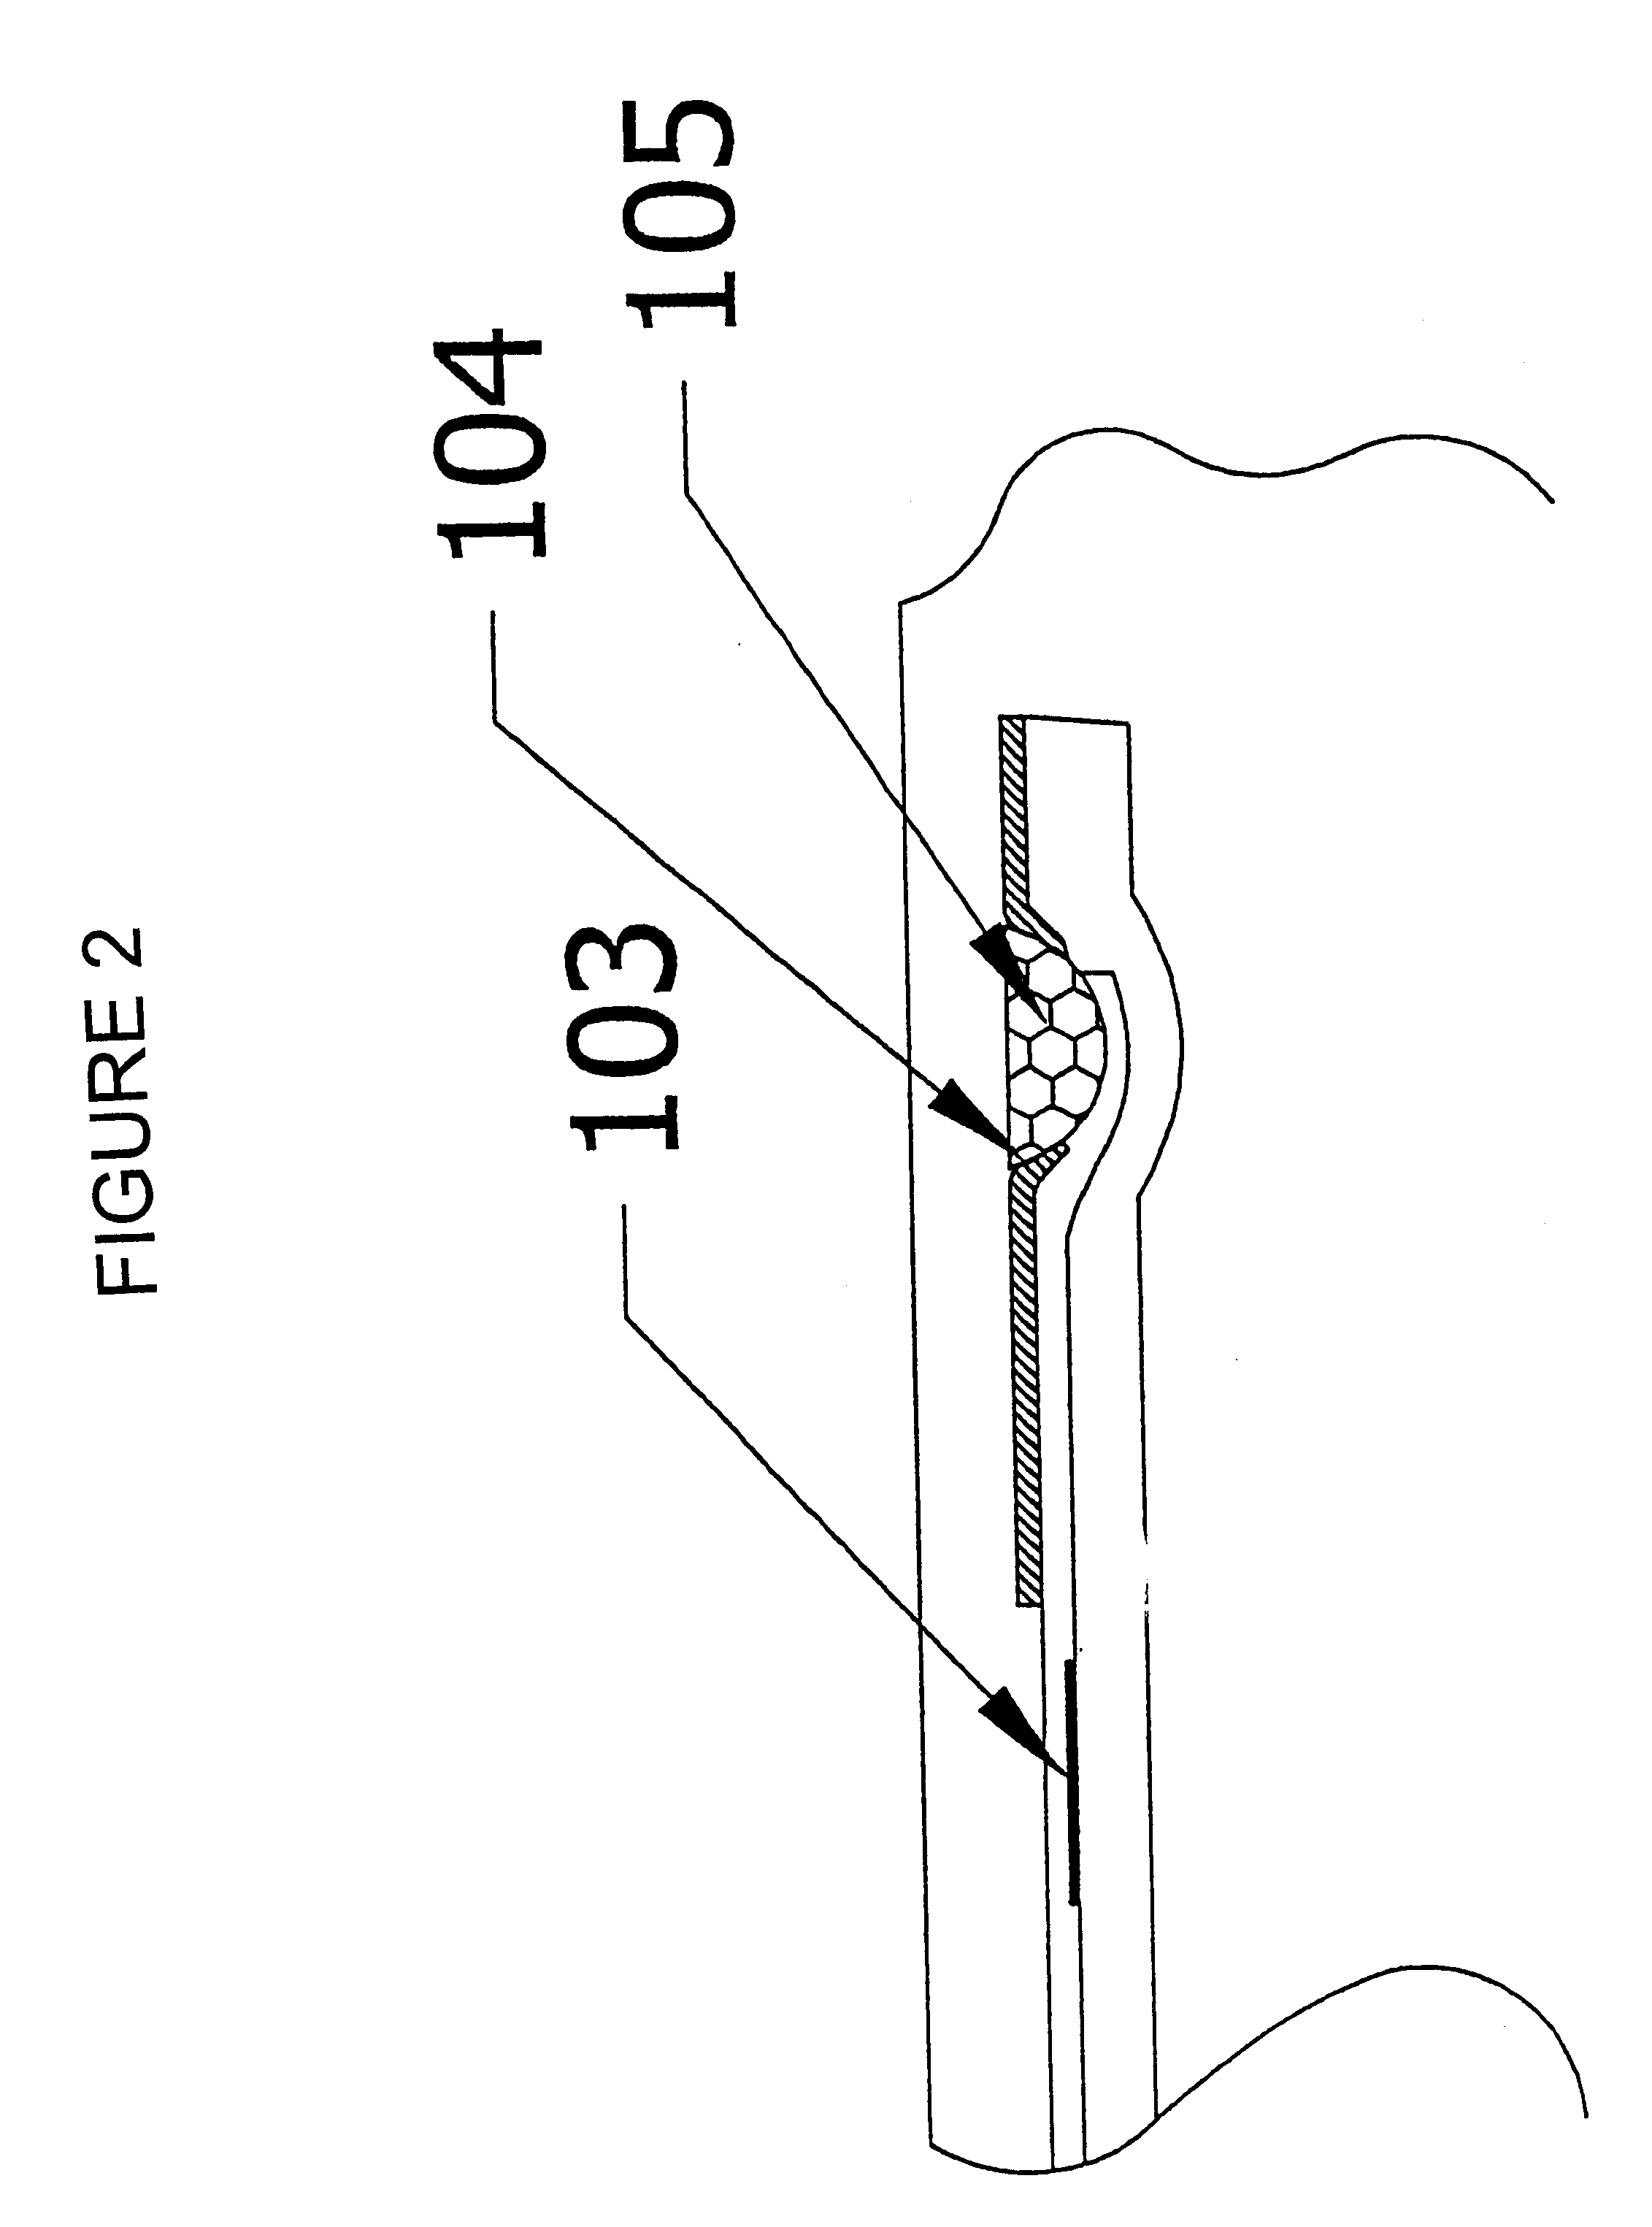 Device and method for integrated diagnostics with multiple independent flow paths